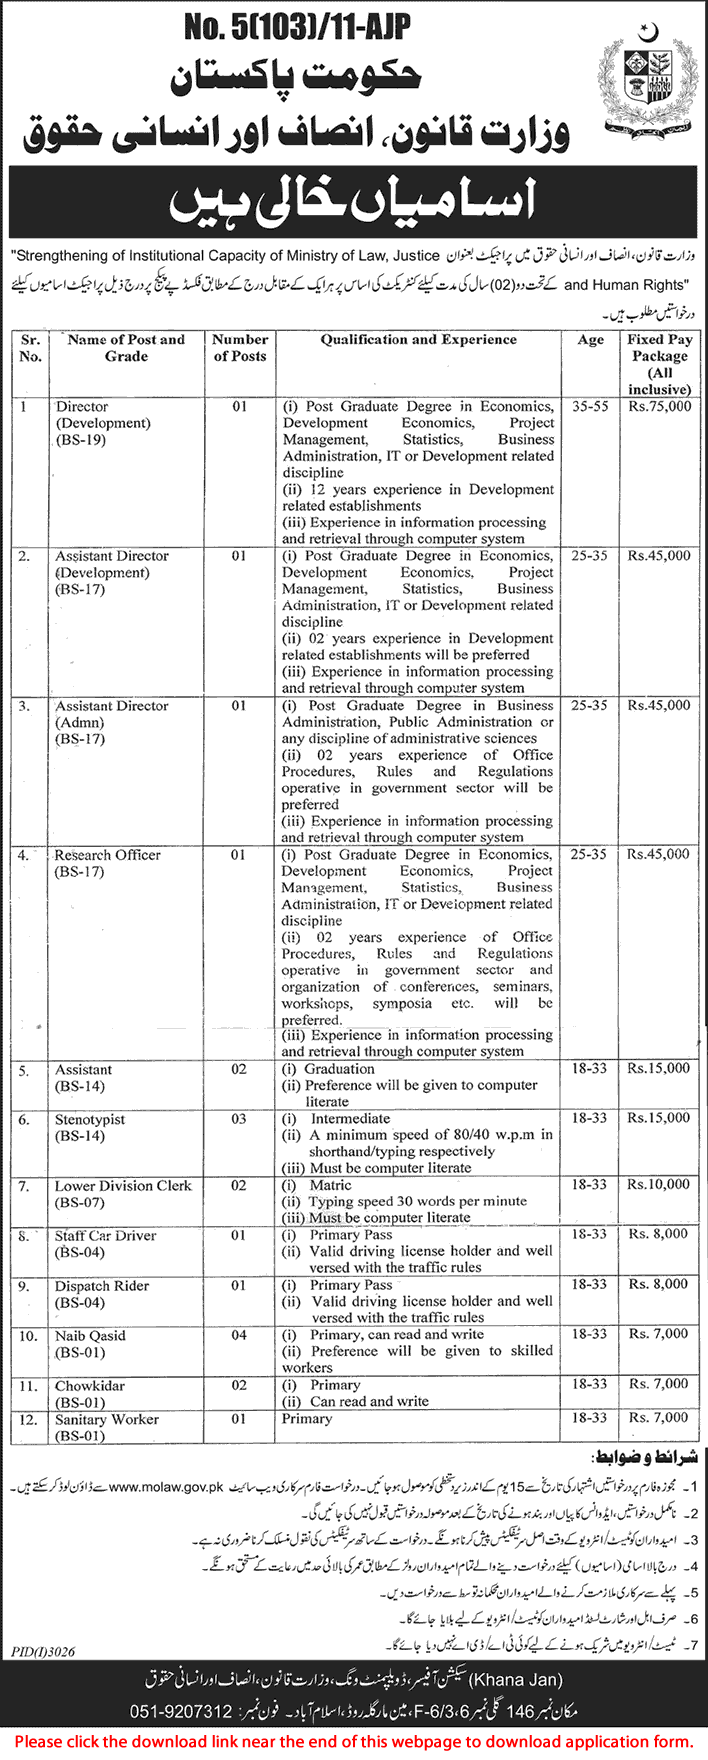 www.molaw.gov.pk Jobs Application Form December 2014 Ministry of Law, Justice & Human Rights